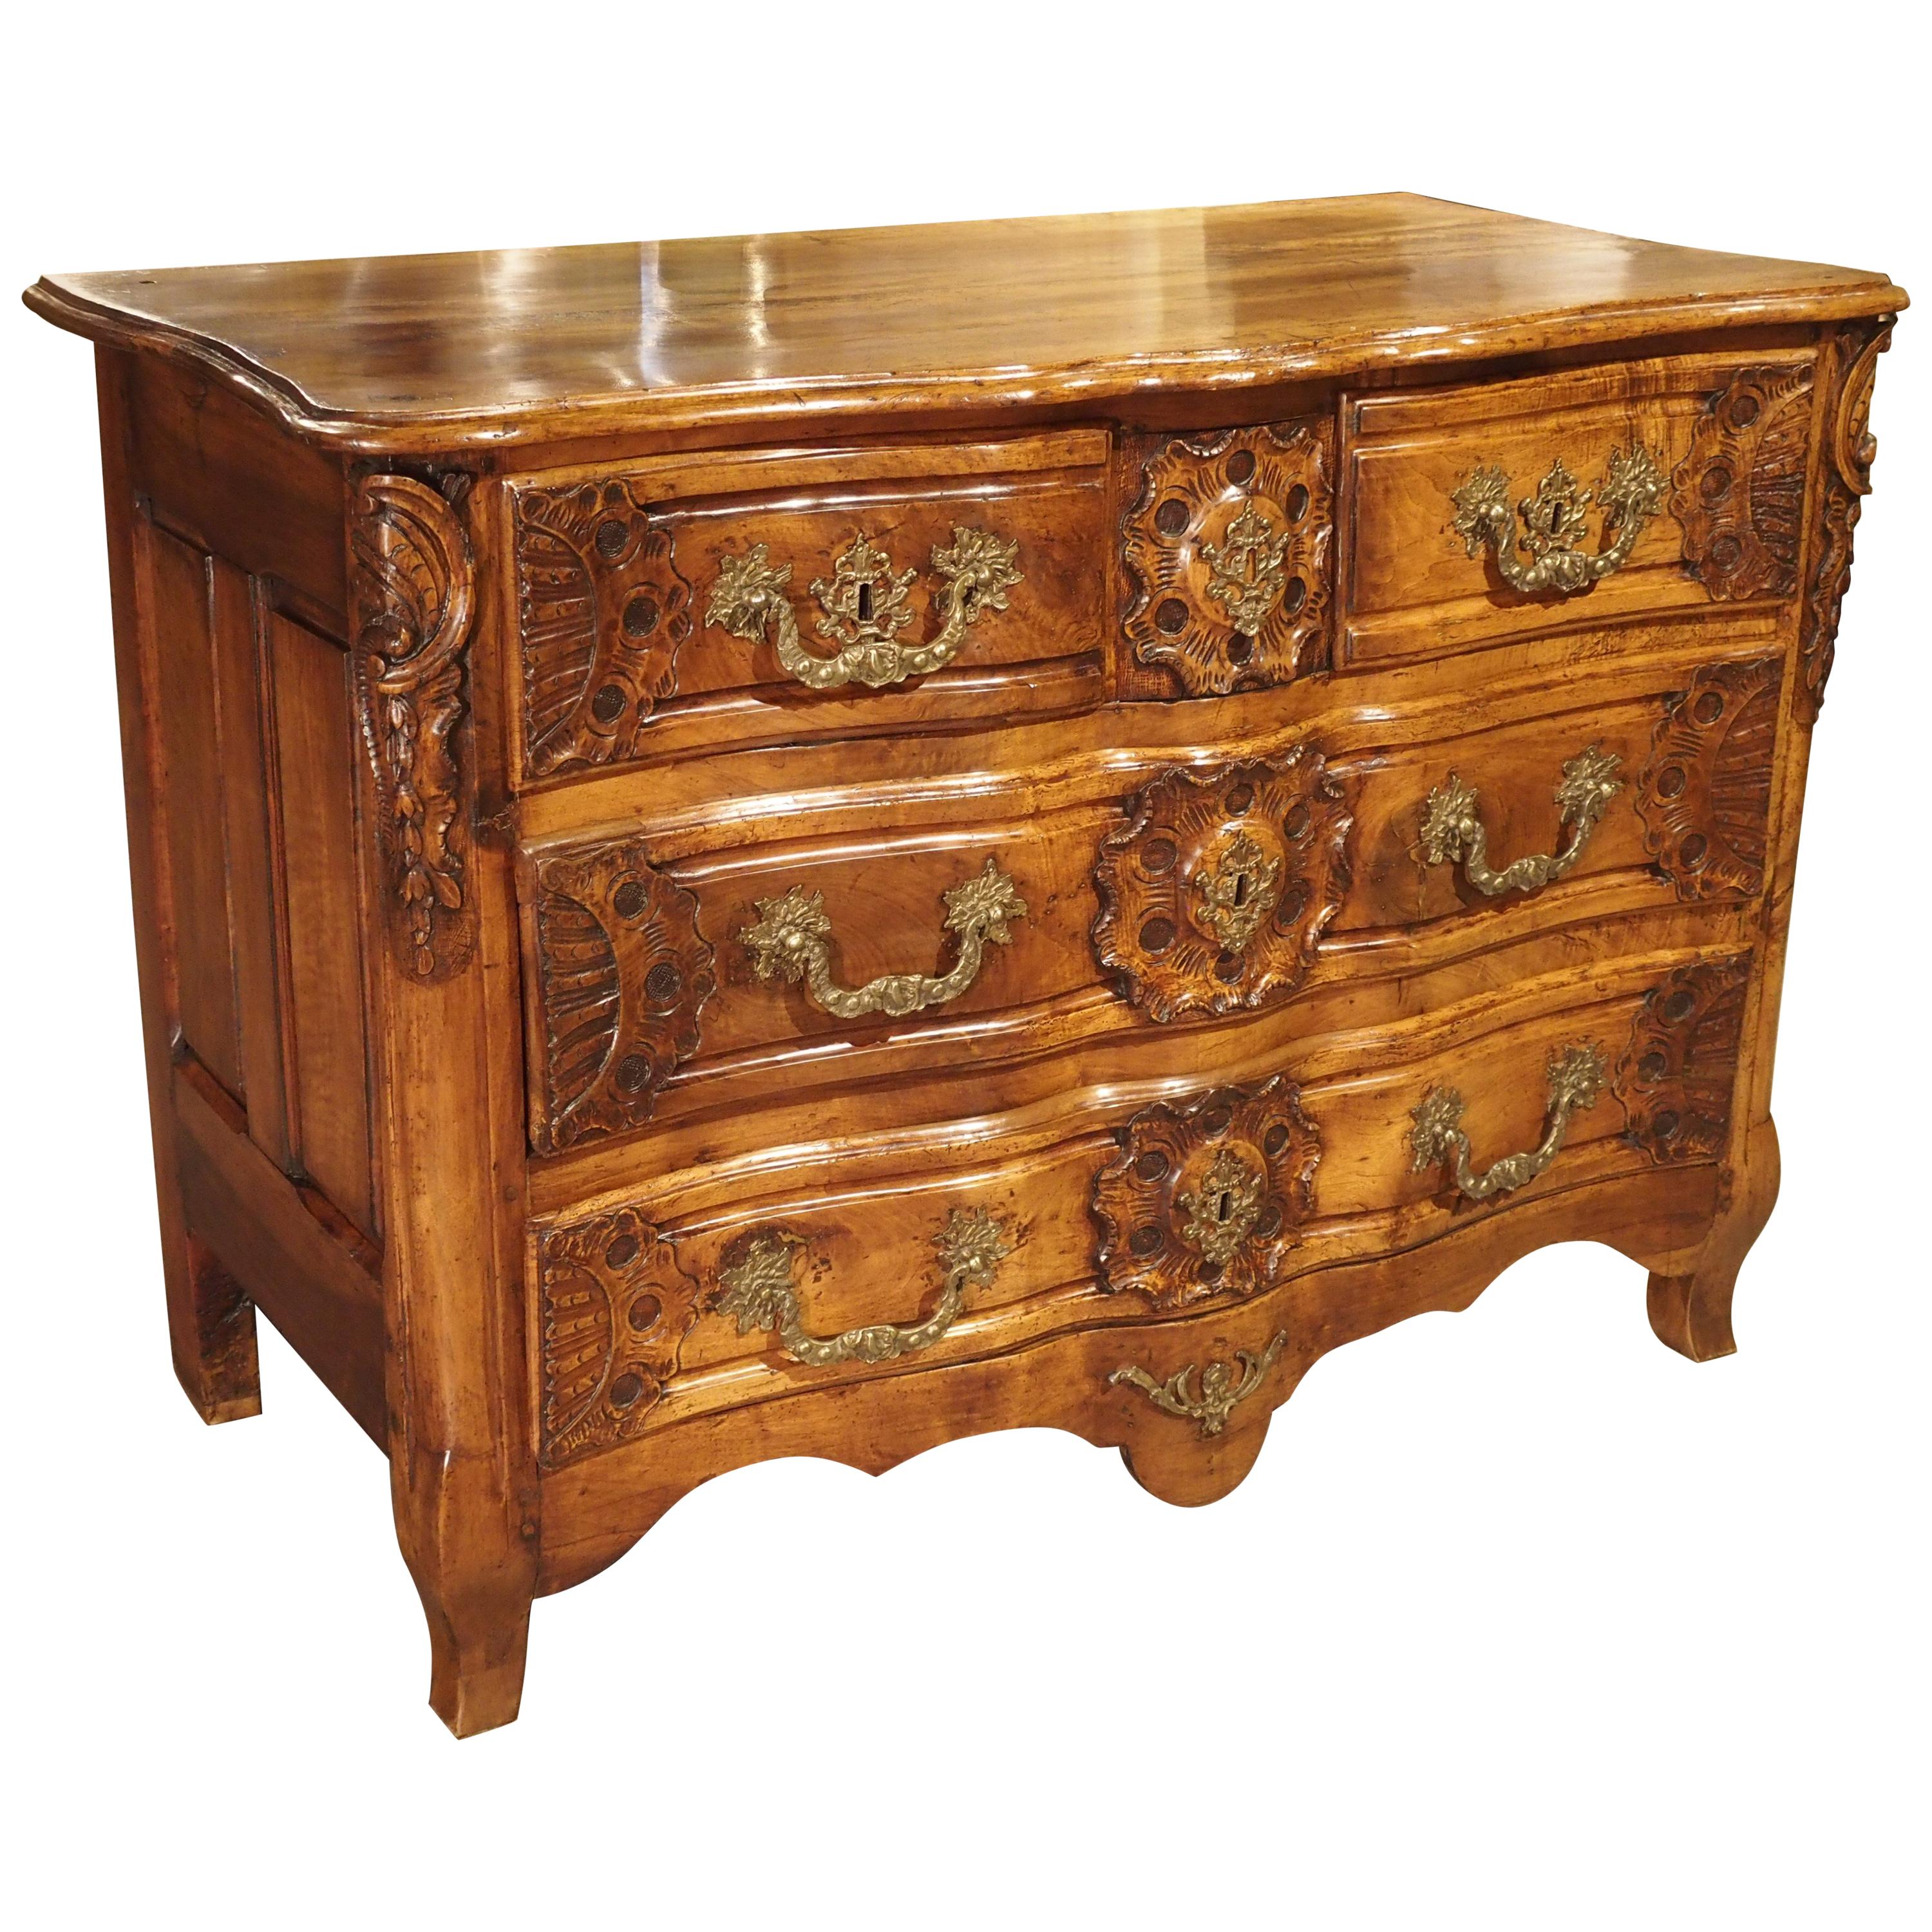 French Walnut Wood Commode from Lyon, circa 1750